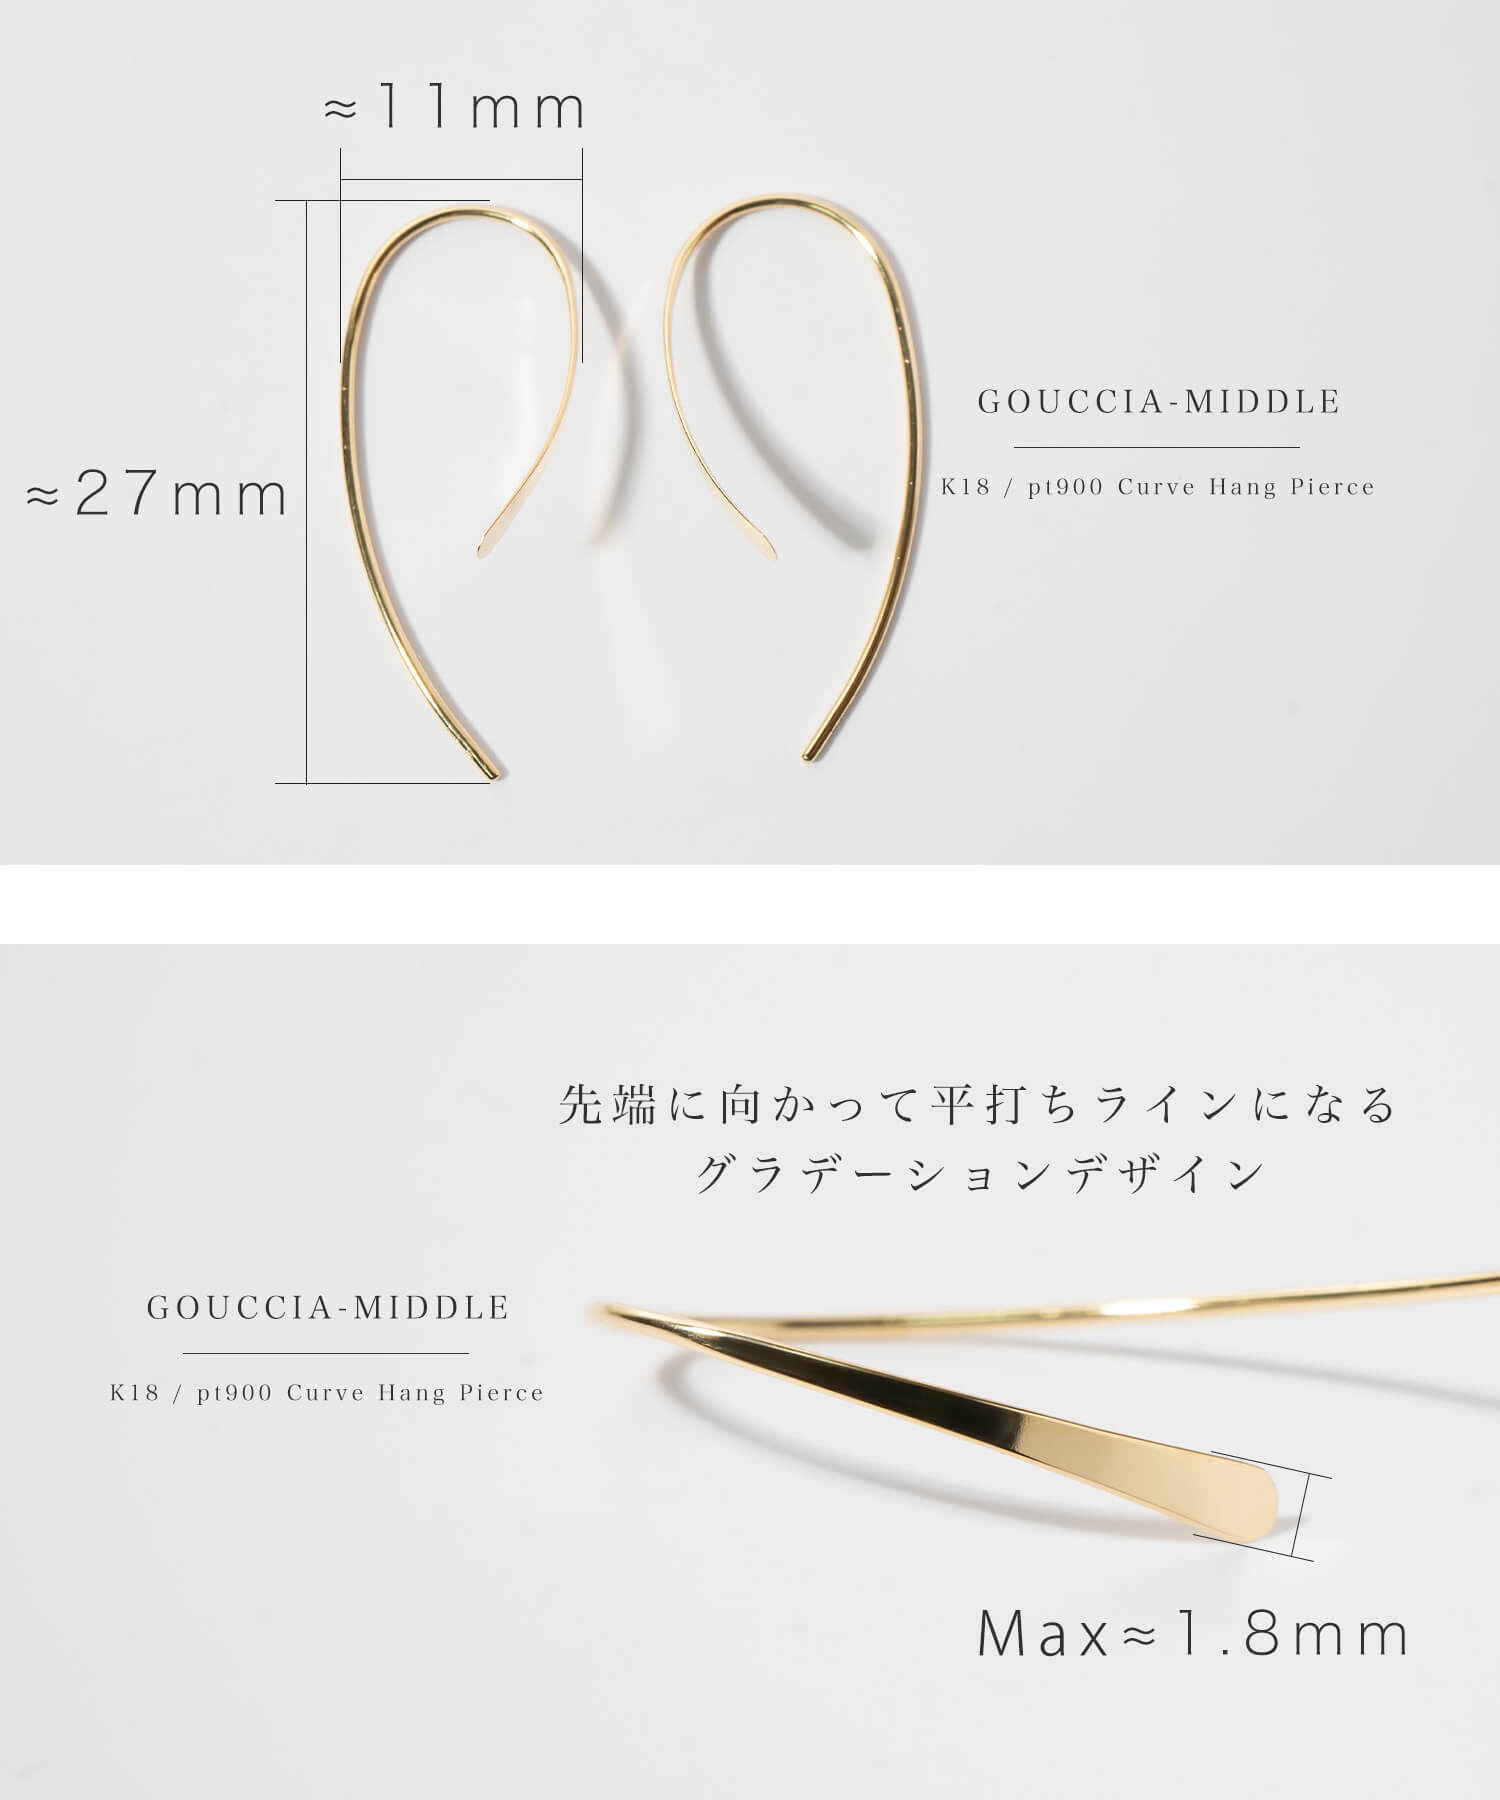 K18 Curve Hang Earrings | GOUCCIA-MIDDLE – Ops. Jewelry